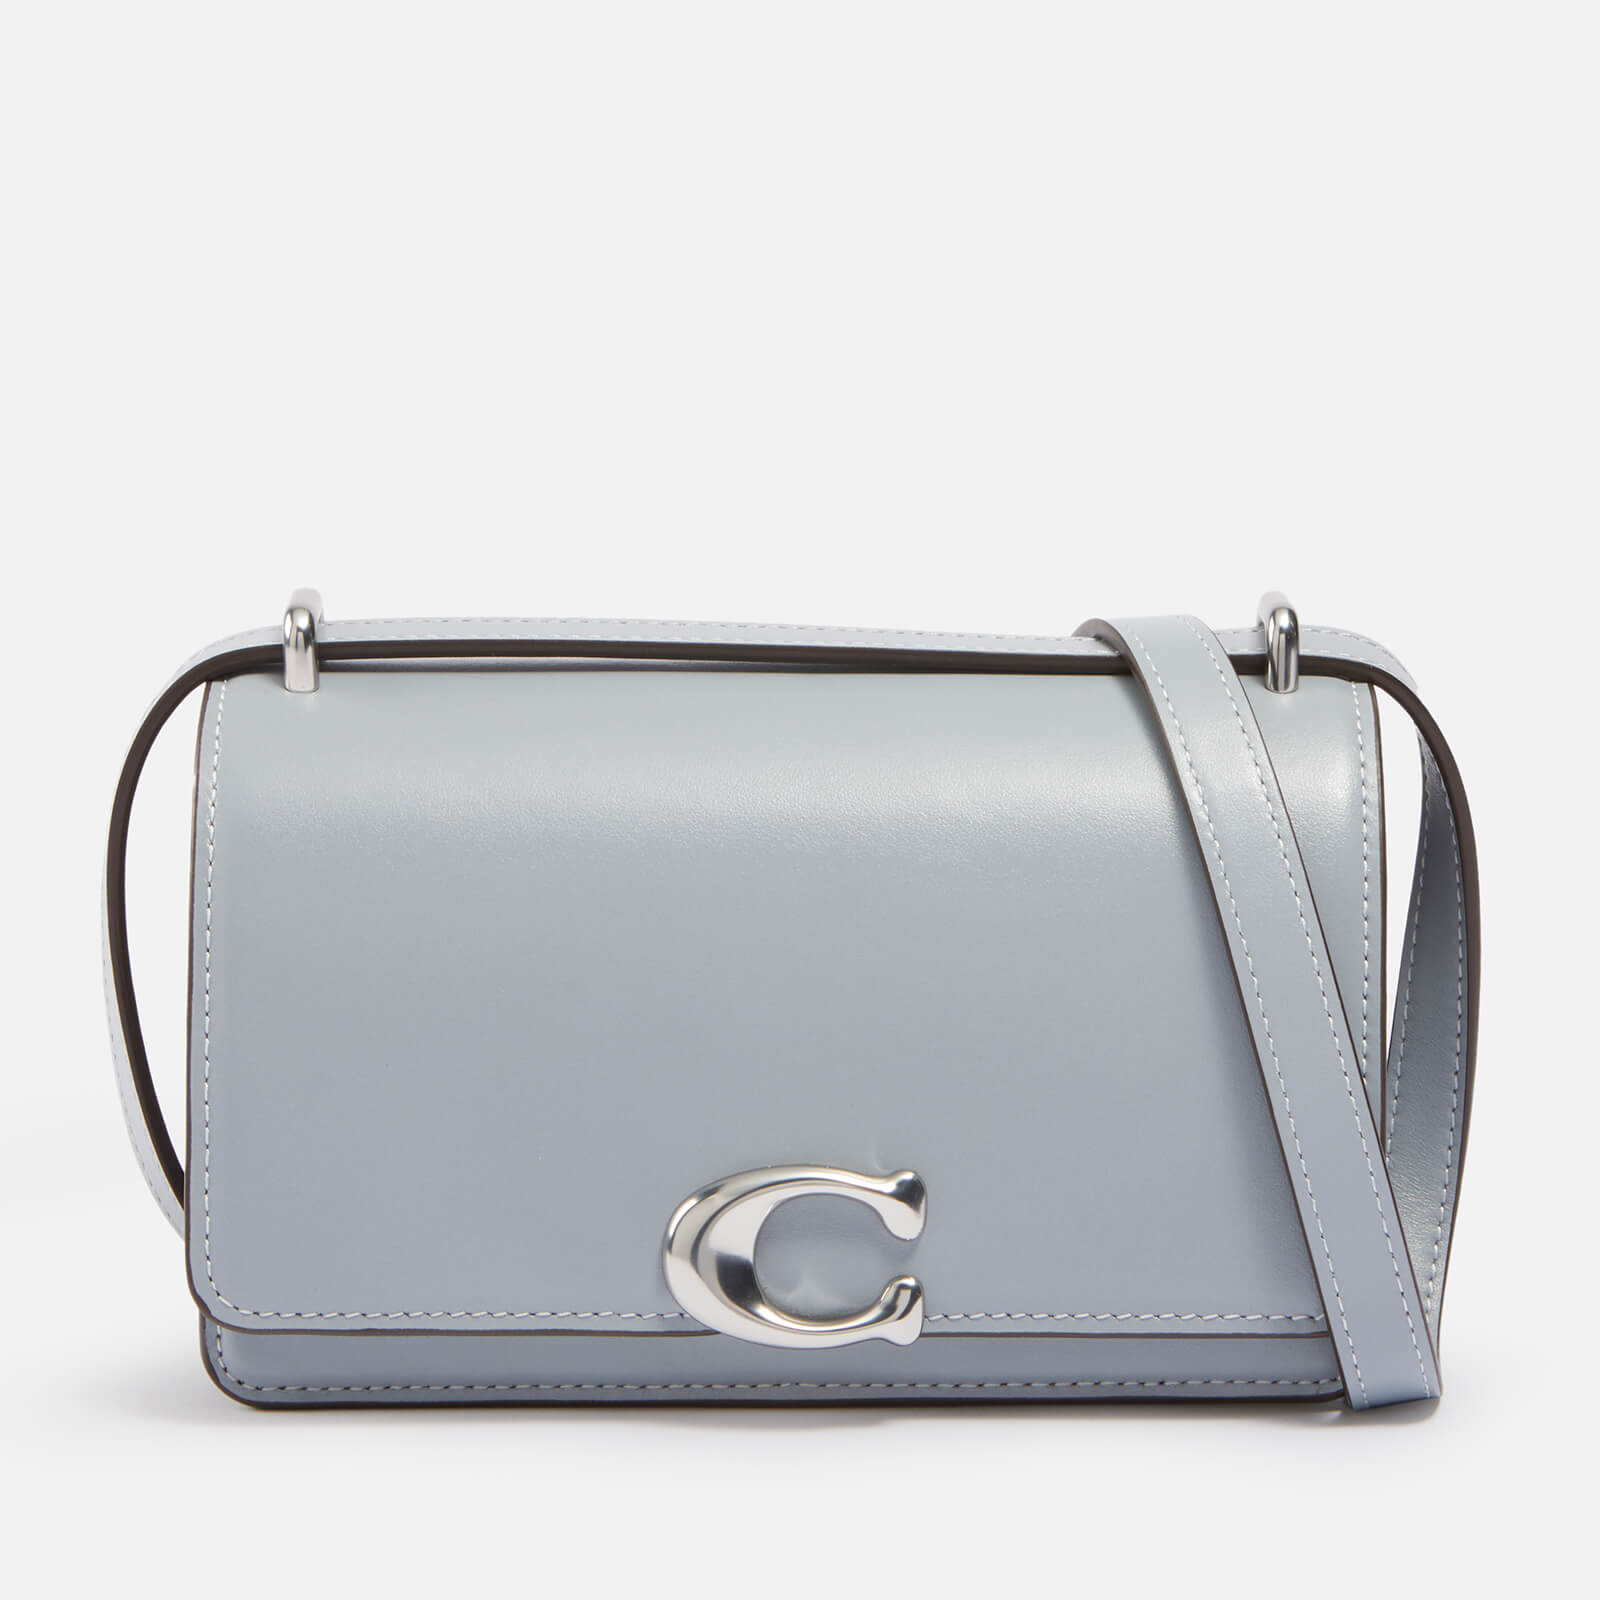 Coach Bandit Luxe Refined Calf Leather Cross Body Bag - Grey Blue